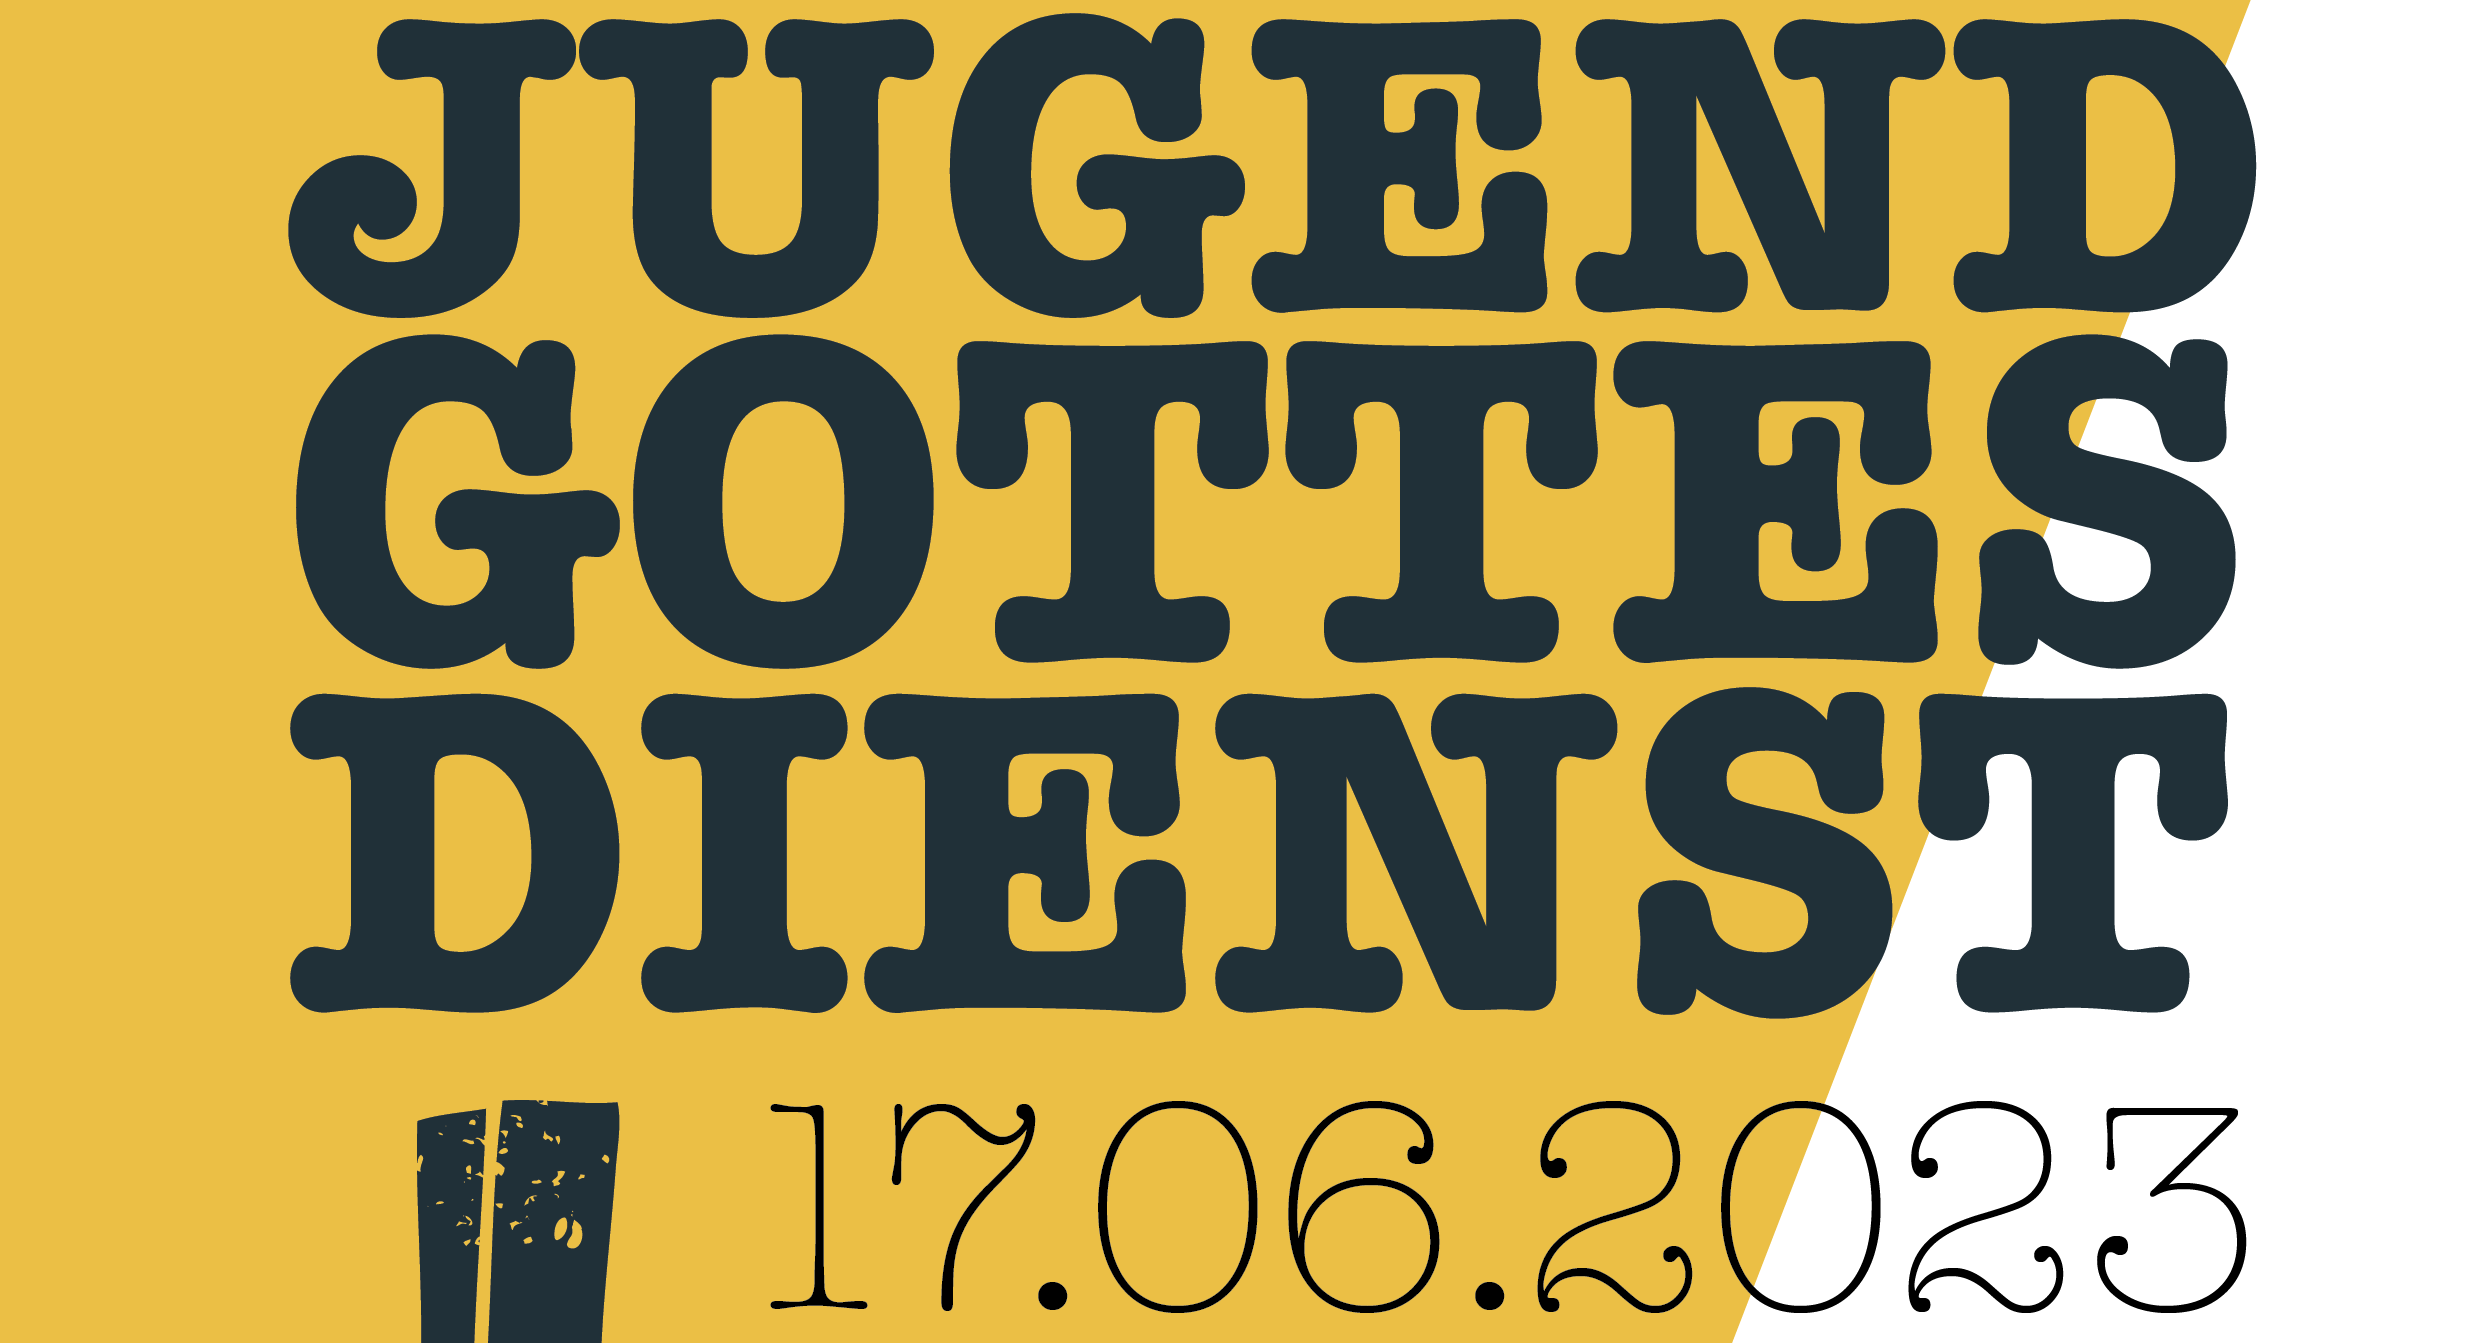 Save the date - Jugendgottesdienst 17.6.2023. 16.30h